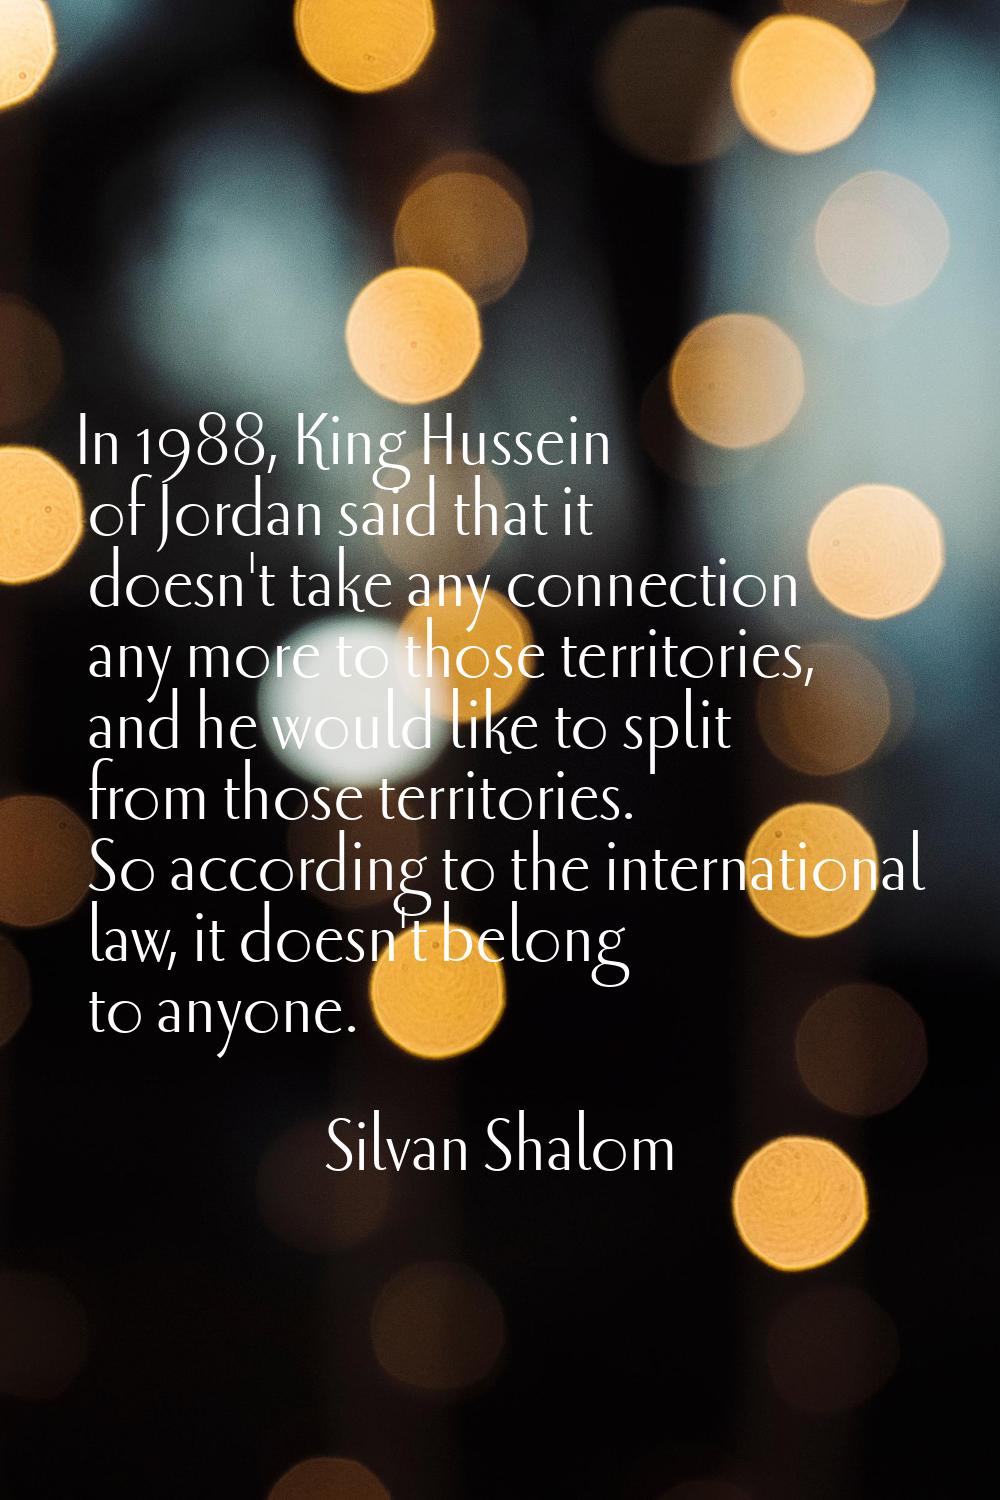 In 1988, King Hussein of Jordan said that it doesn't take any connection any more to those territor